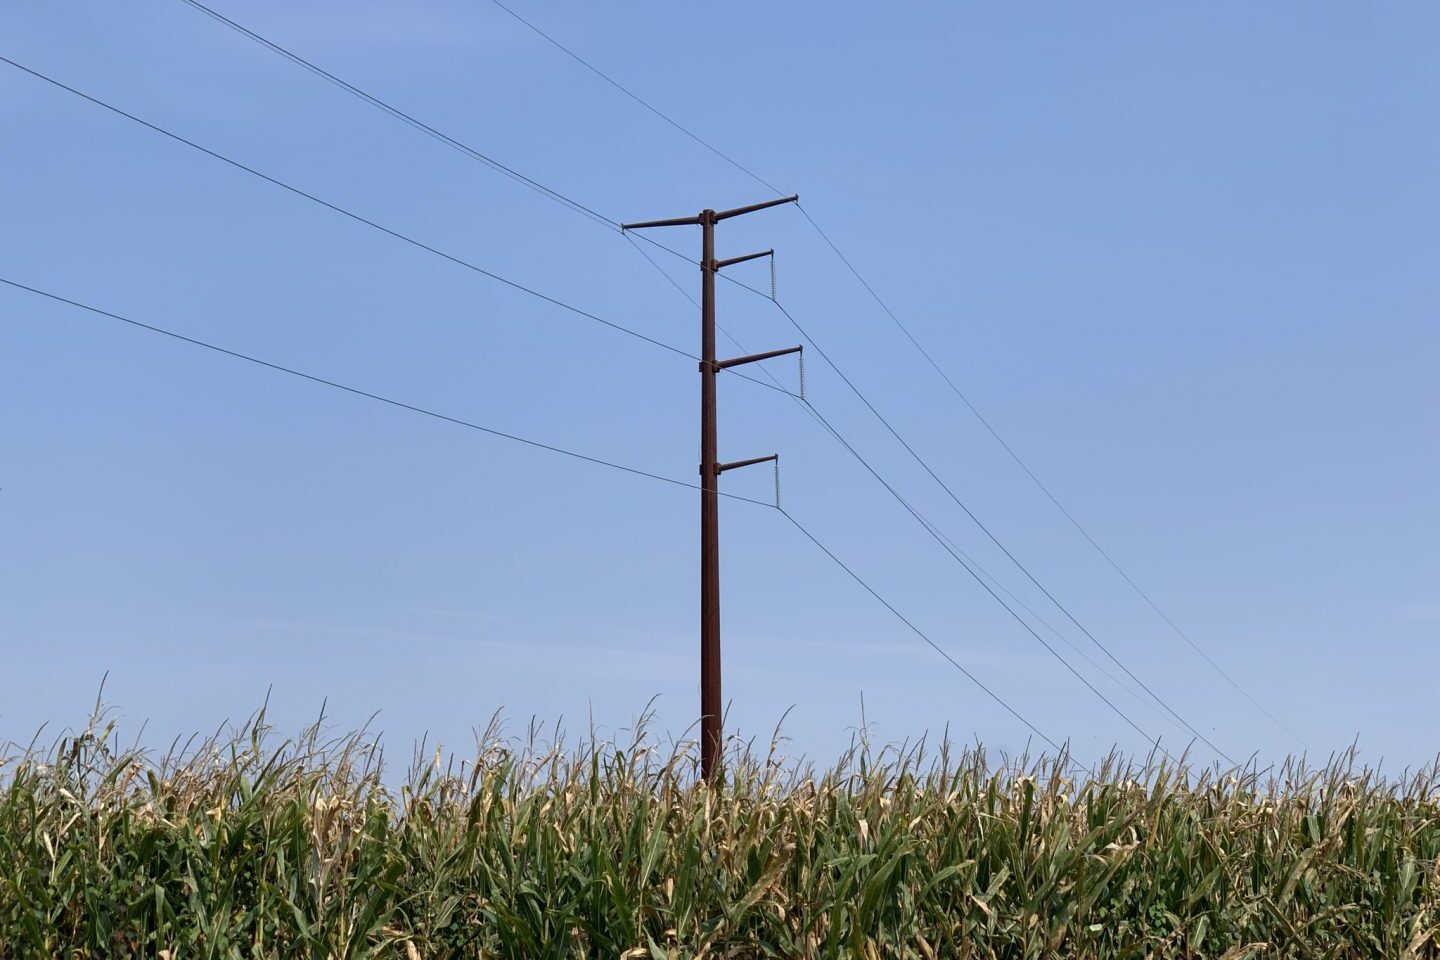 pole and power line in with vegetation in front of it